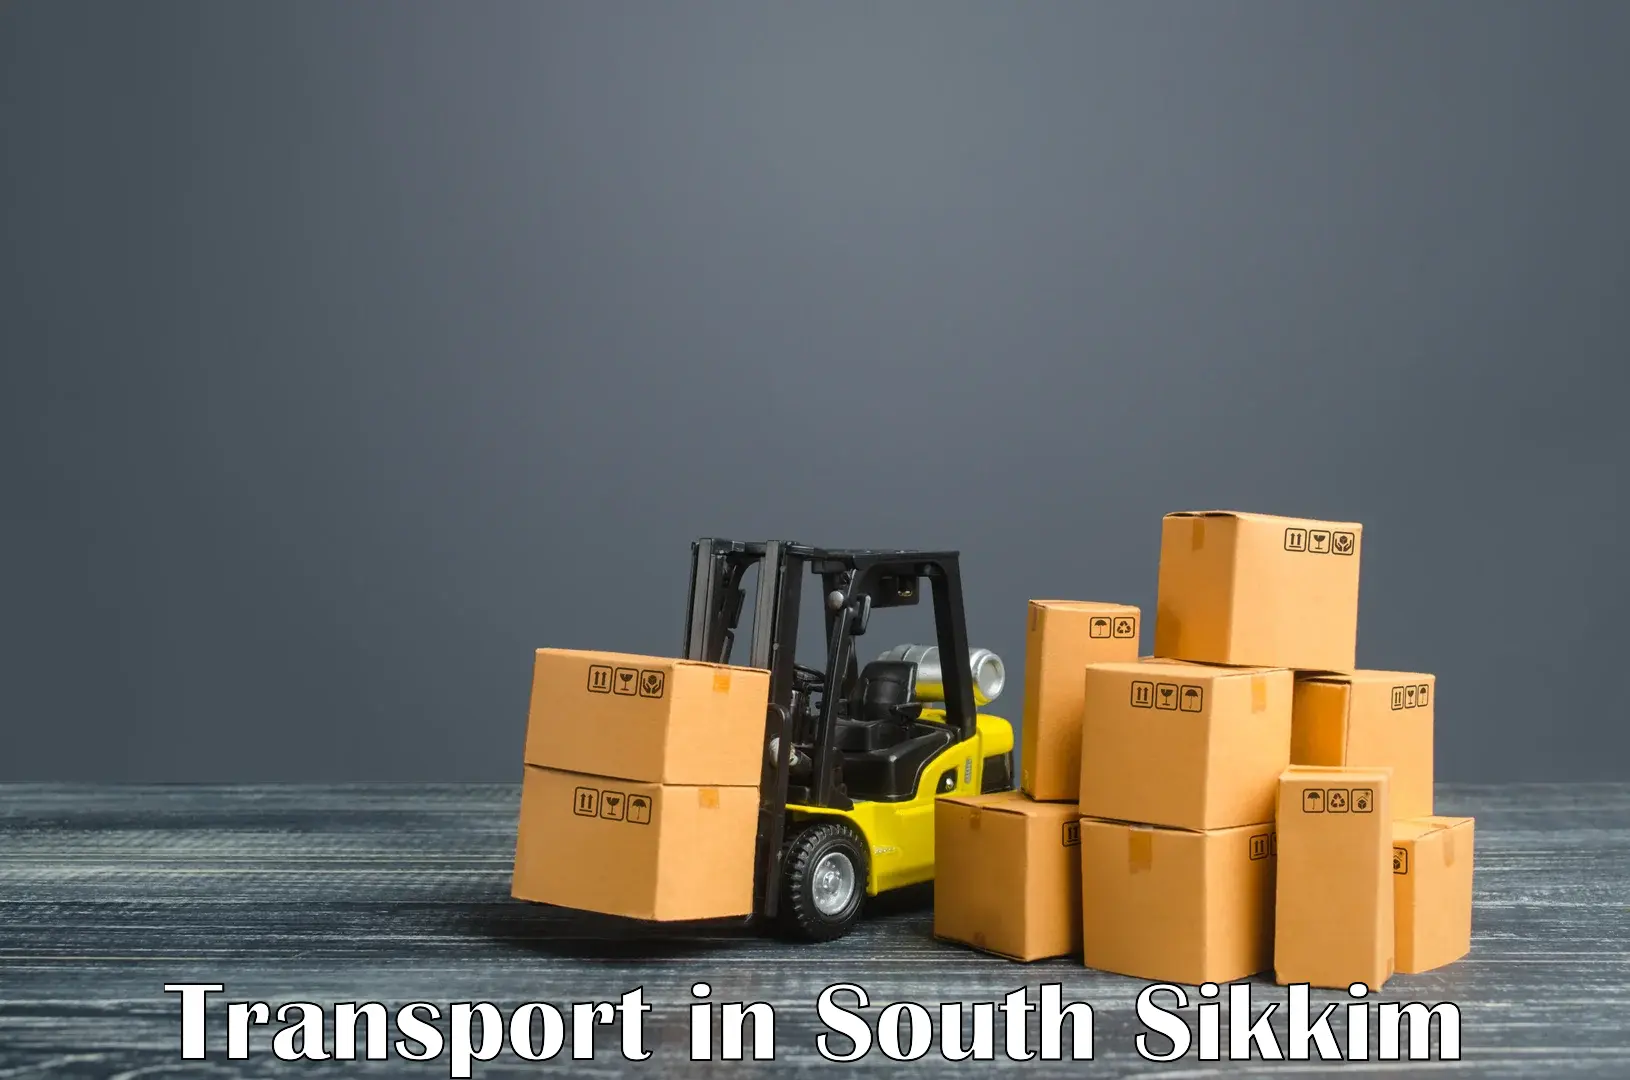 Express transport services in South Sikkim